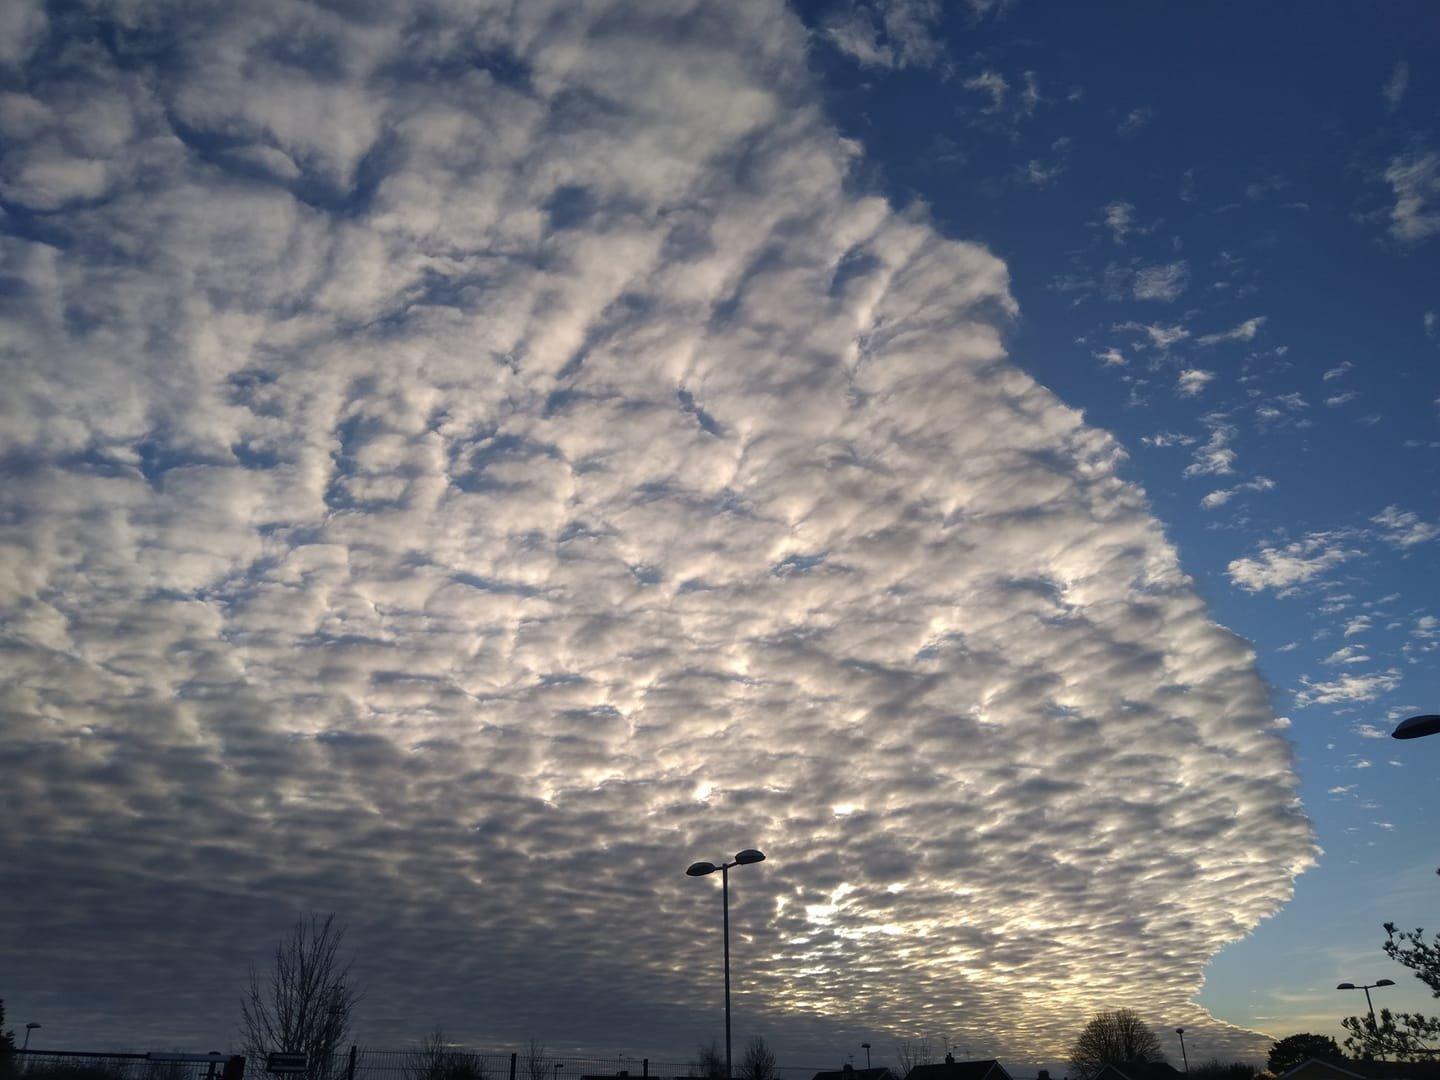 Clouds covering the sky. Picture: Lisbeth Bathory Stark